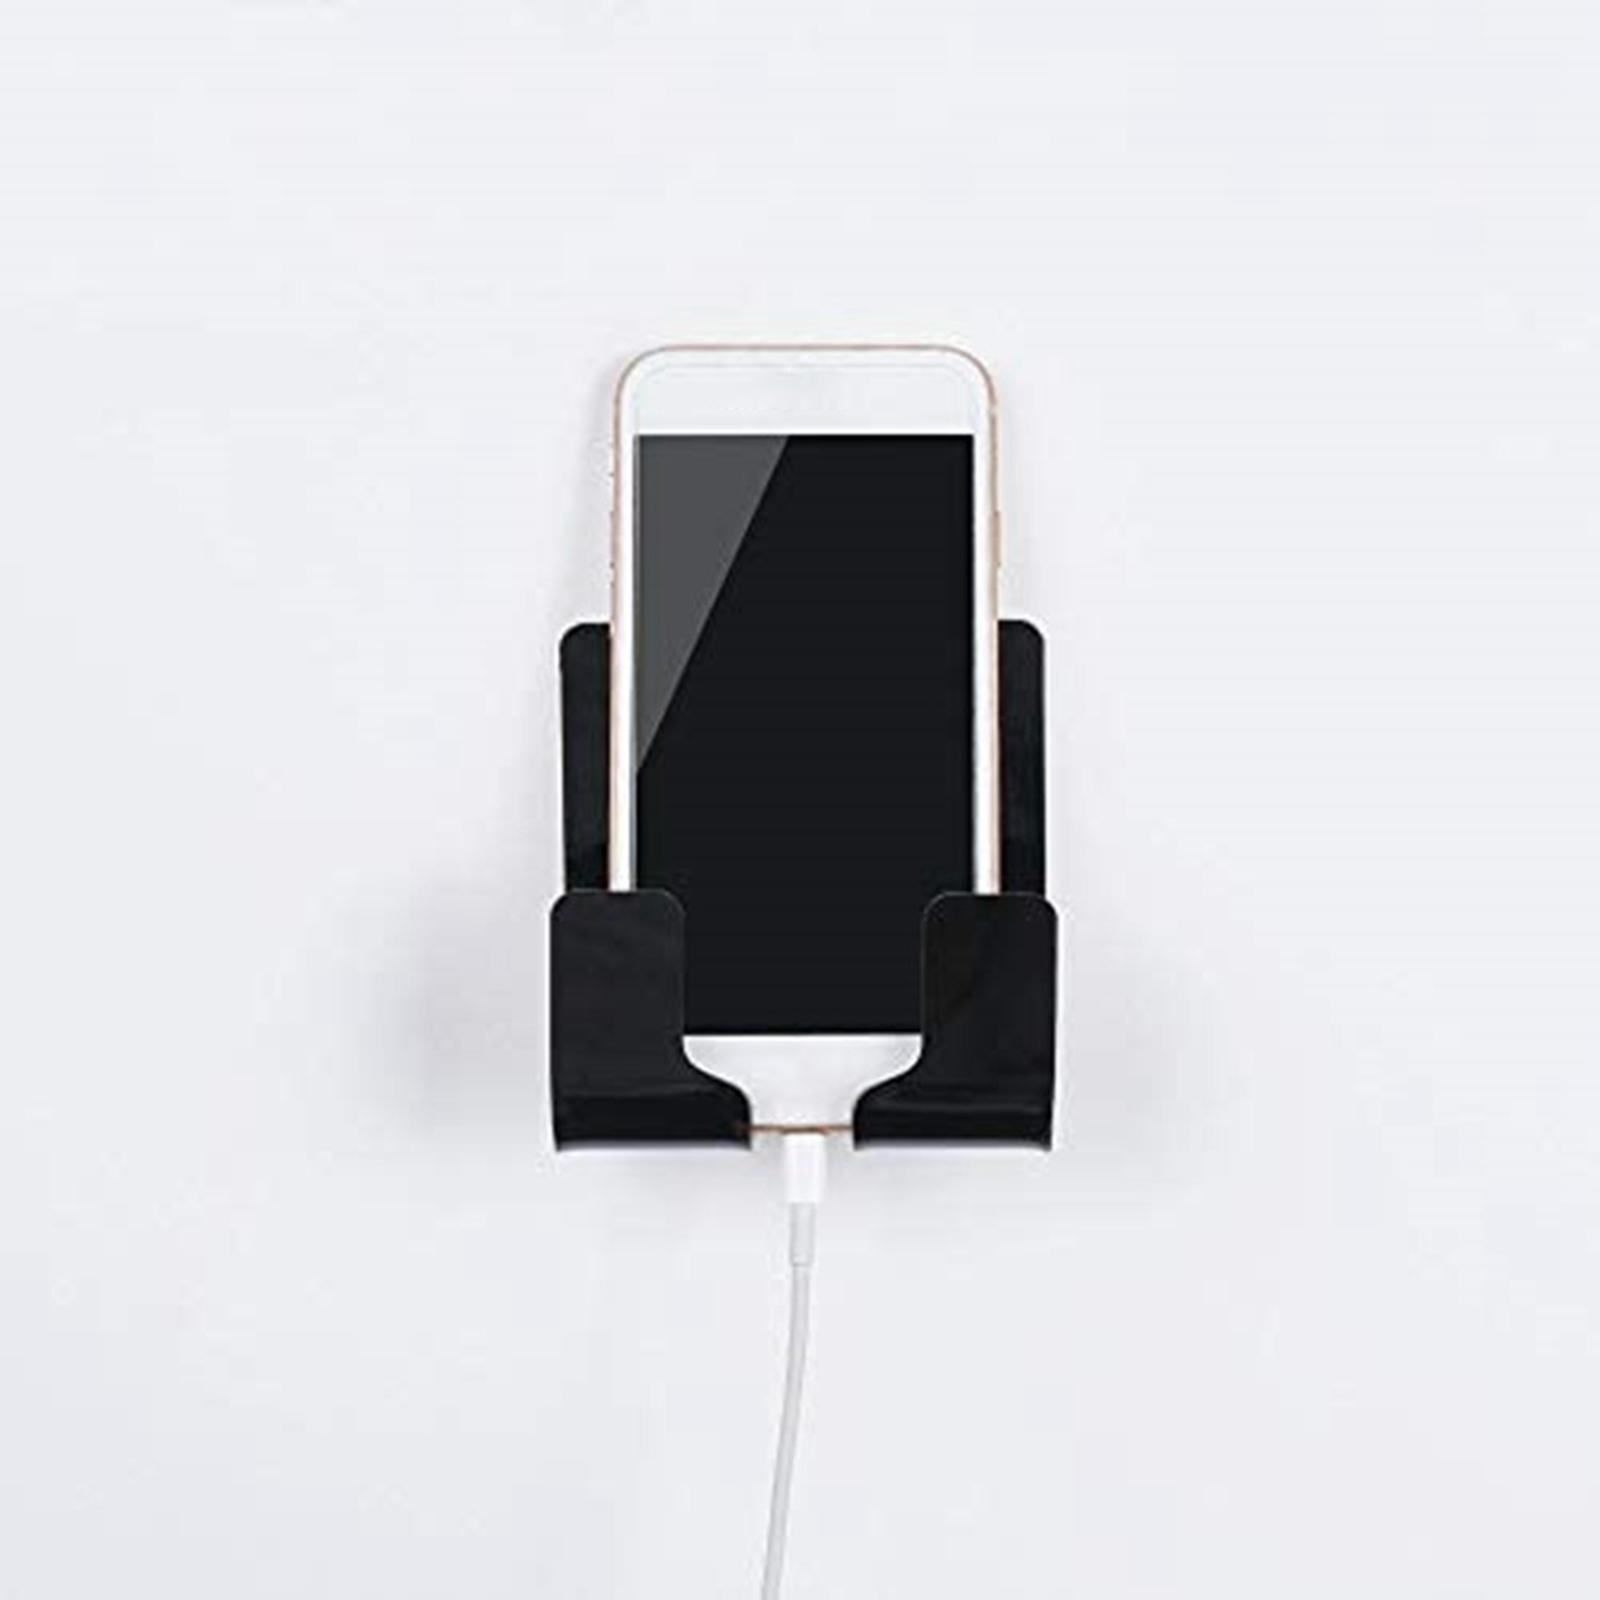 1pc Adhesive Mobile Phone Wall Charger Holder Wall Charger Hook Universal Cellphone Hanging Stand for Home Office Bedside Bracket